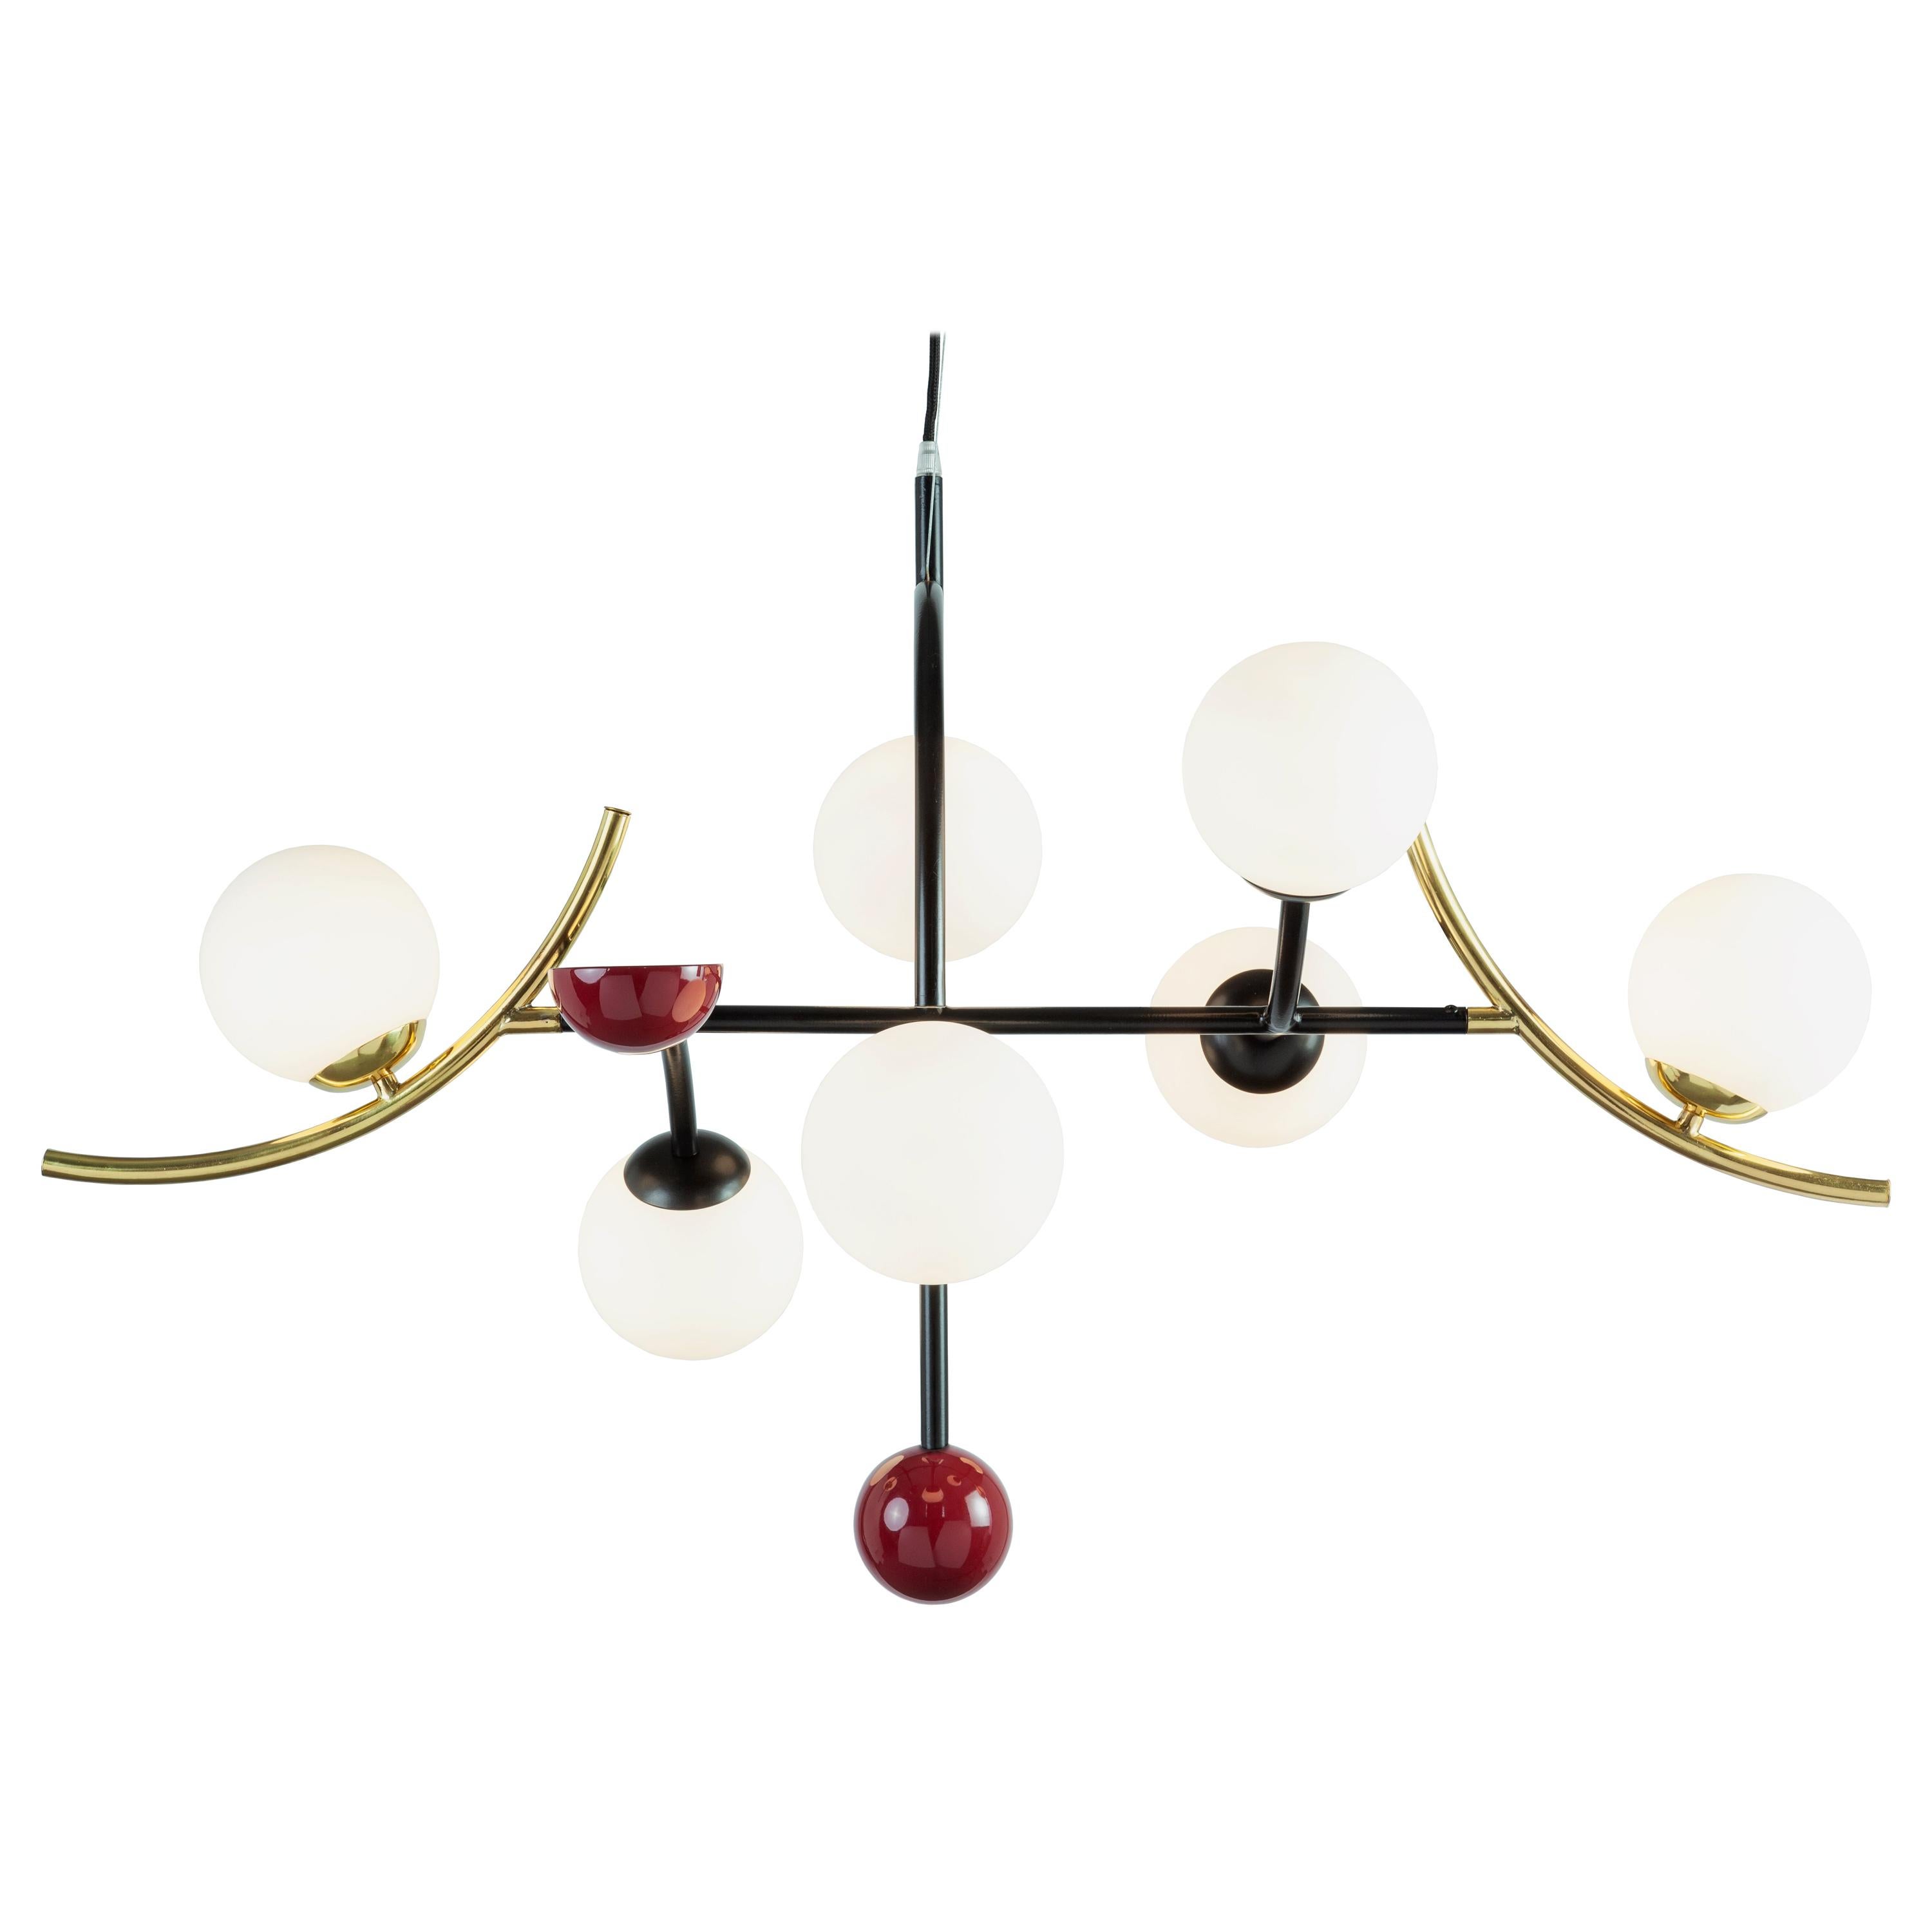 Art-Deco Inspired Brass, Mint, Black Detail Helio Pendant Lamp by UTU Lamps For Sale 4